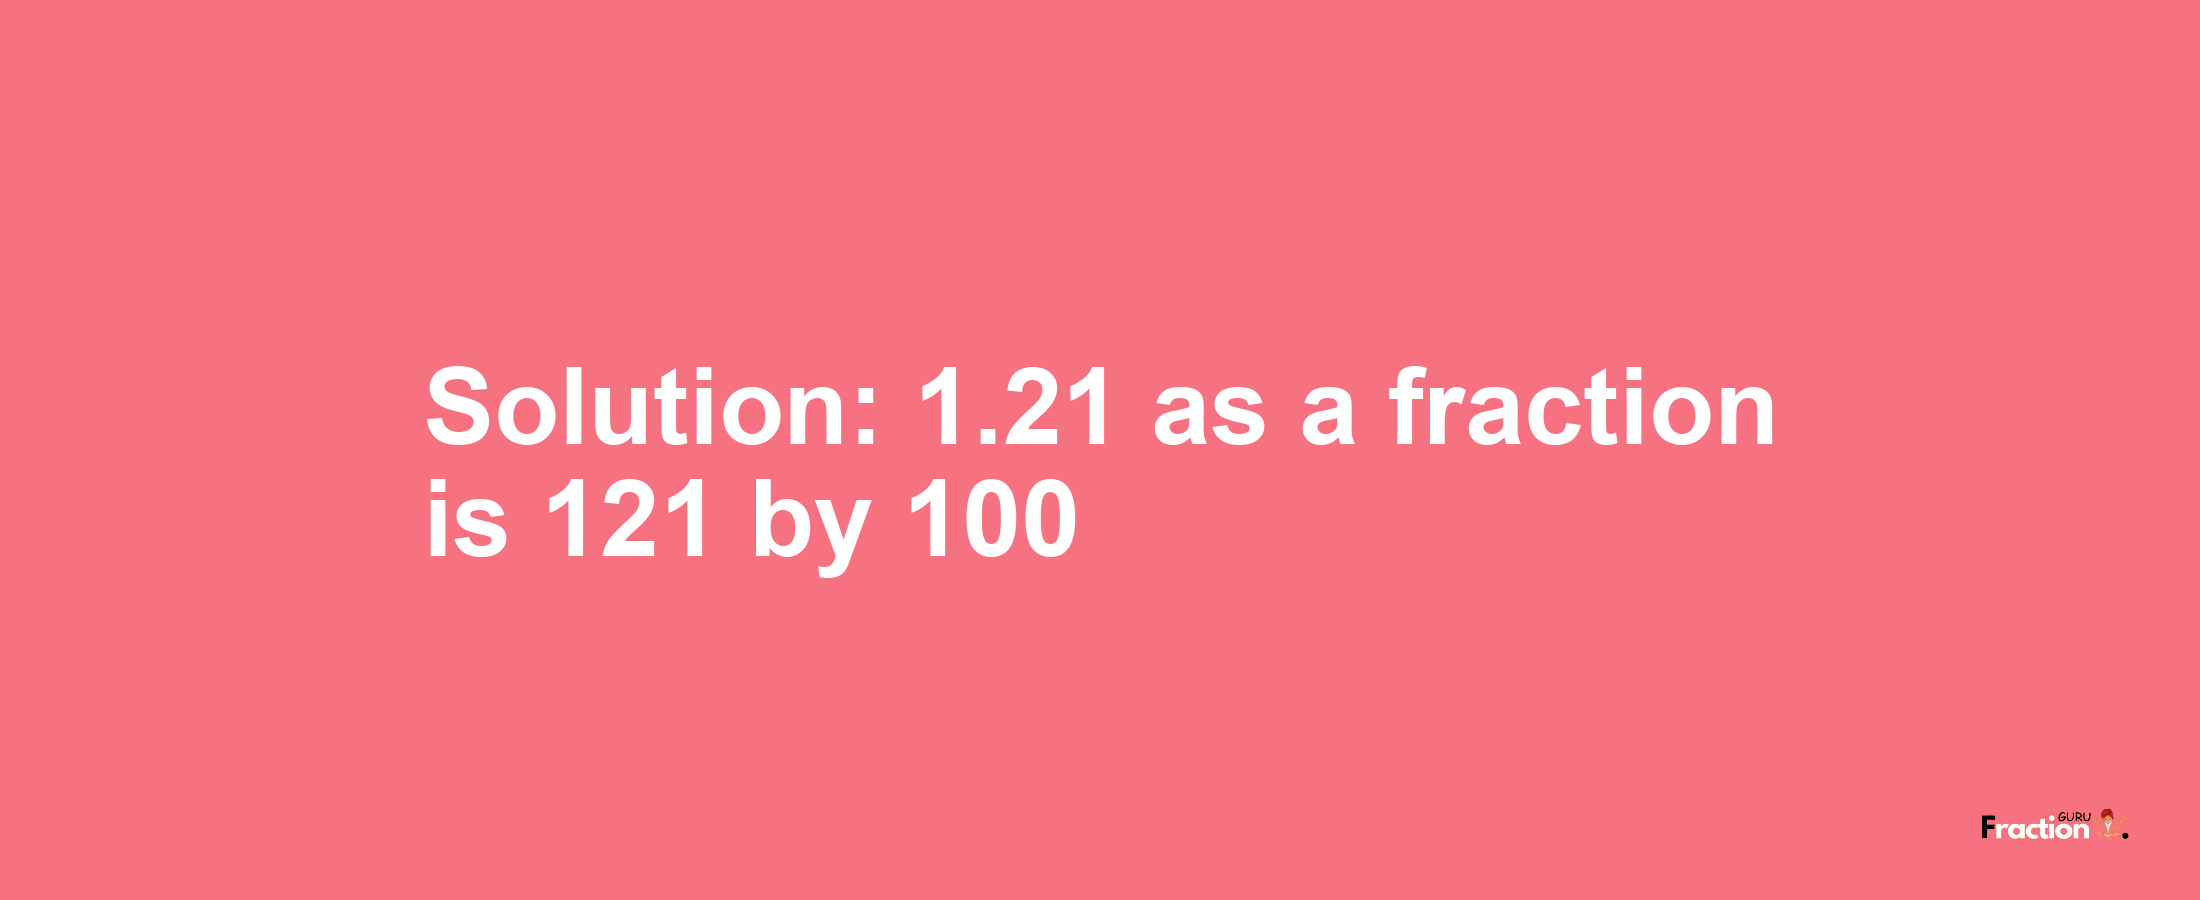 Solution:1.21 as a fraction is 121/100